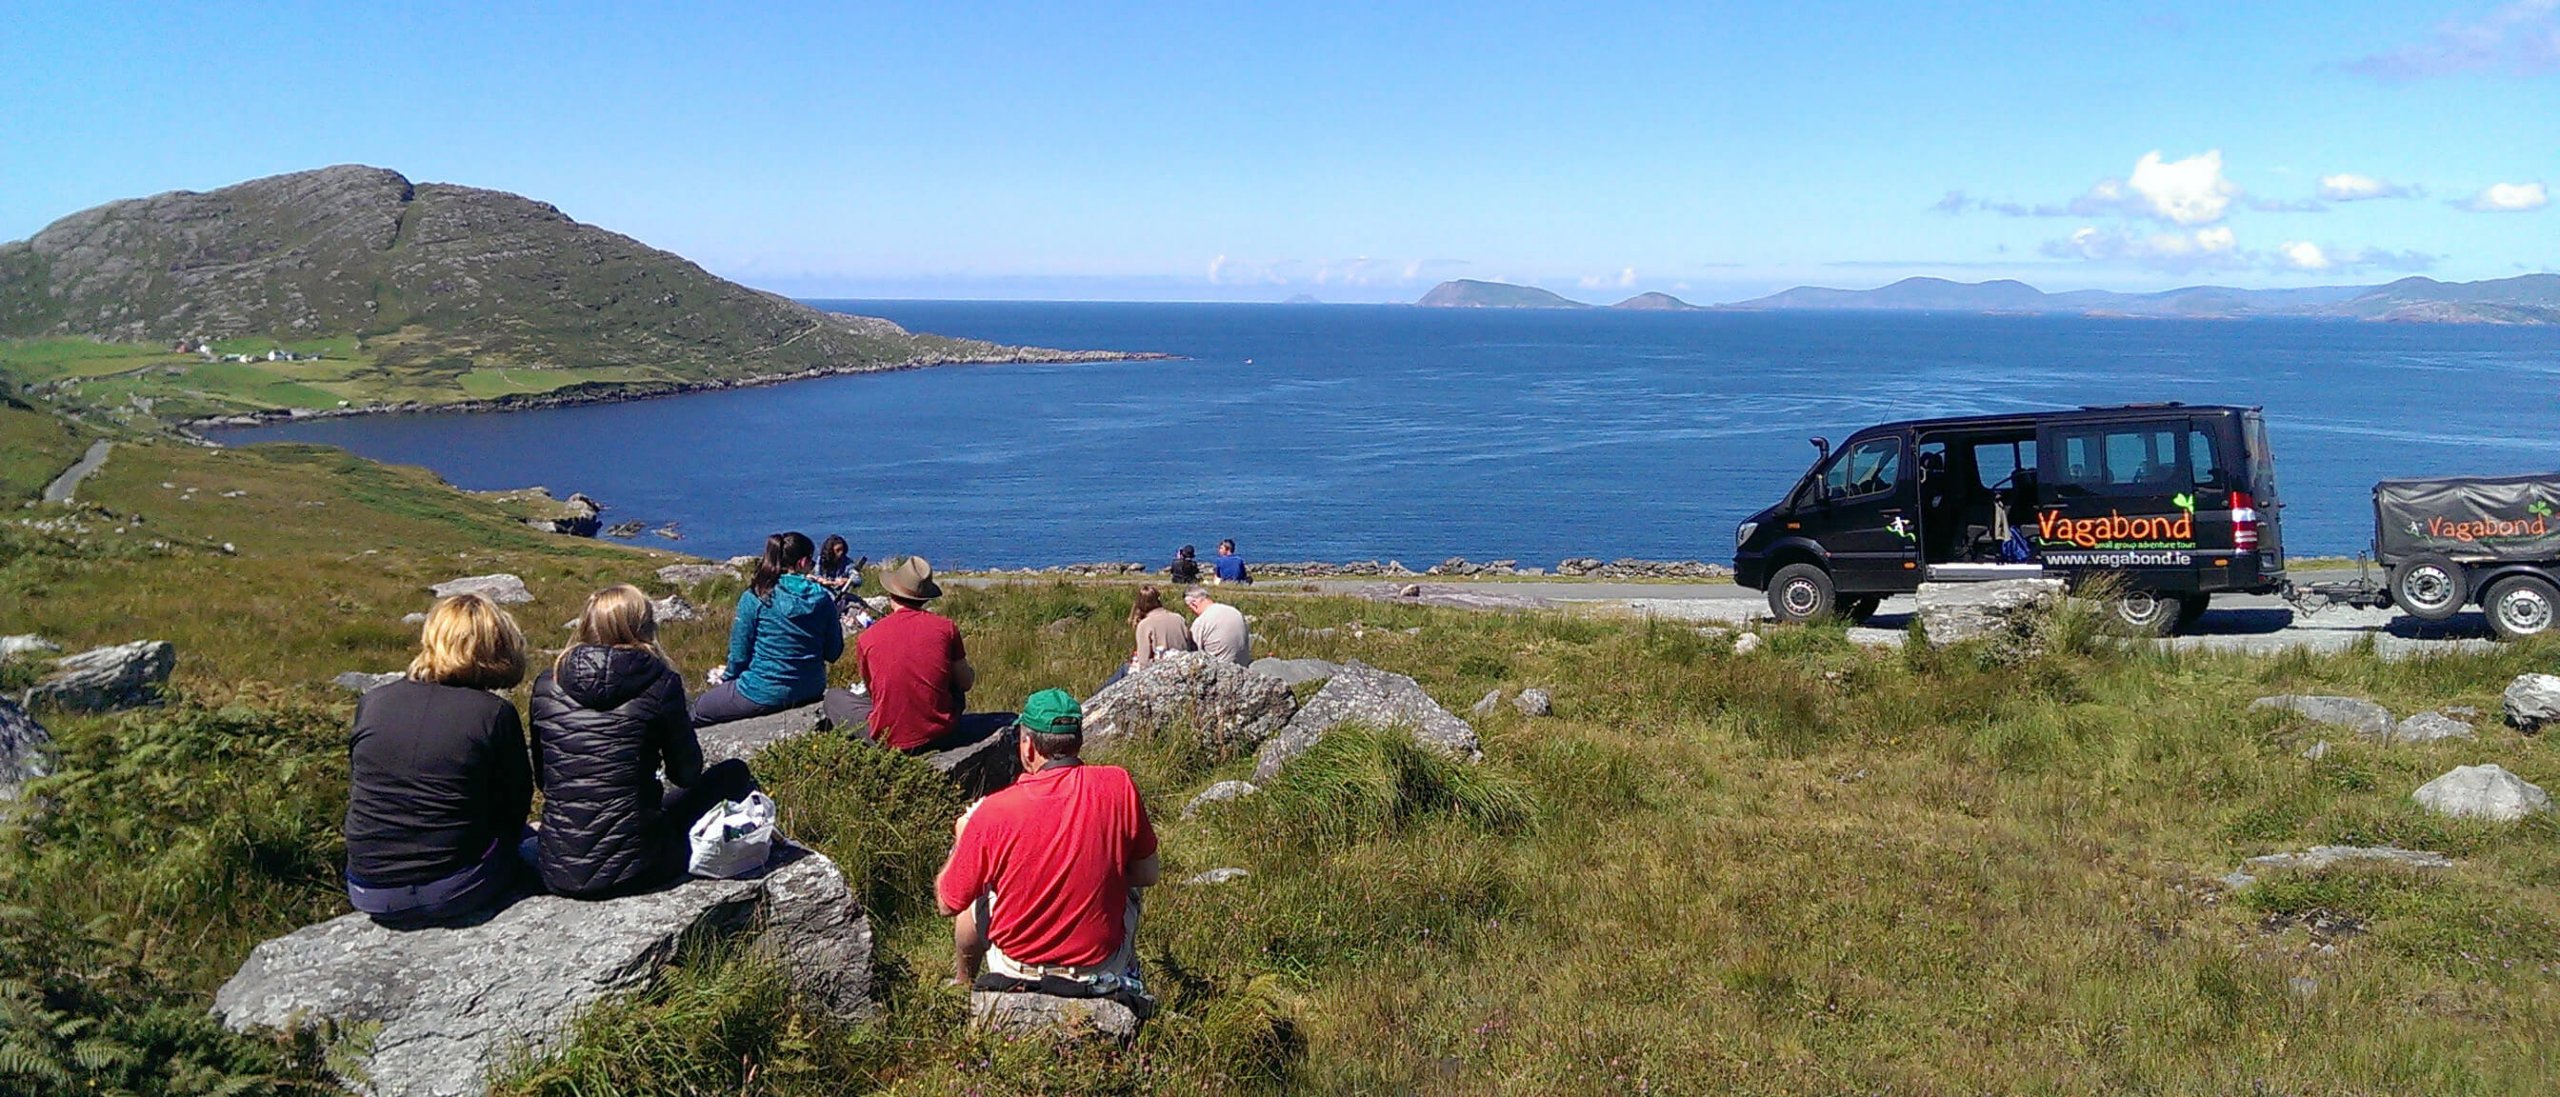 Vagabond group picnicing outside on a fine day with a VagaTron tour vehicle parked nearby and a scenic ocean view in the background